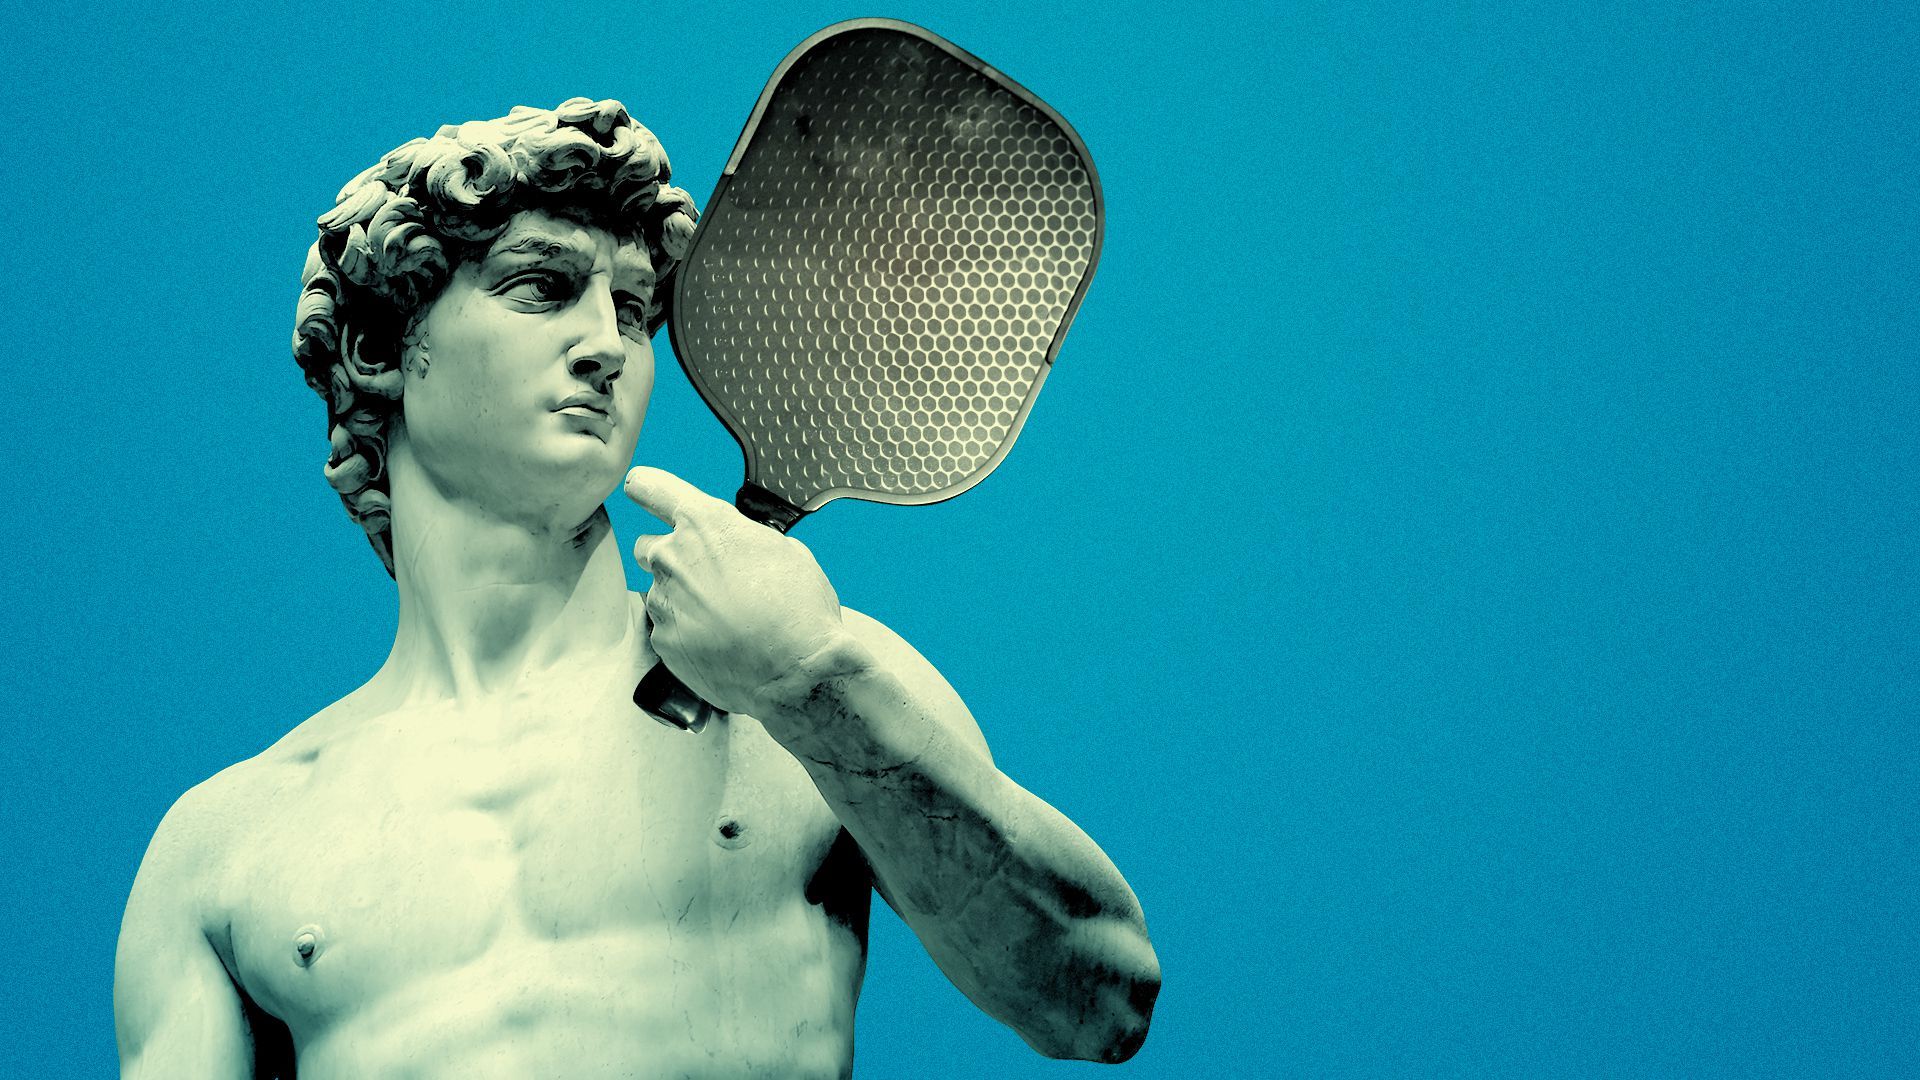 Photo illustration of Michelangelo's Statue of David holding a pickleball paddle